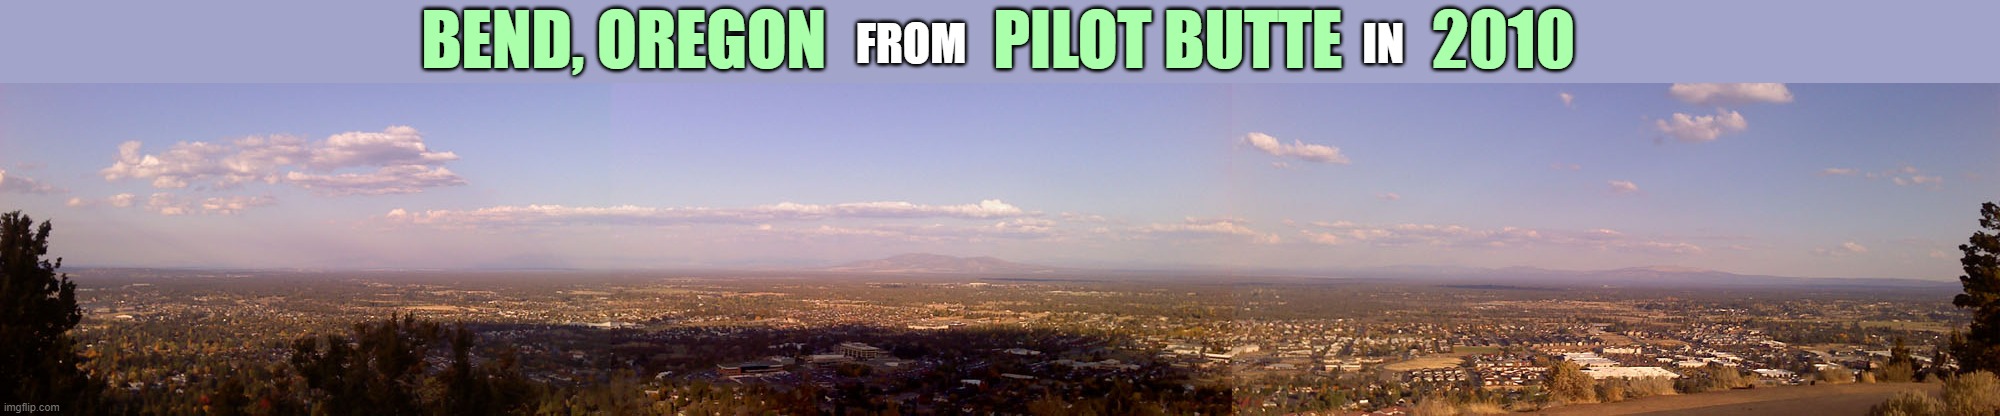 Panorama of Bend, OR from Pilot Butte, 2010. I pieced it together in Photoshop (before phones had panoramic cameras). | FROM                                             IN; BEND, OREGON             PILOT BUTTE       2010 | image tagged in scenic,oregon,private,photoshop | made w/ Imgflip meme maker